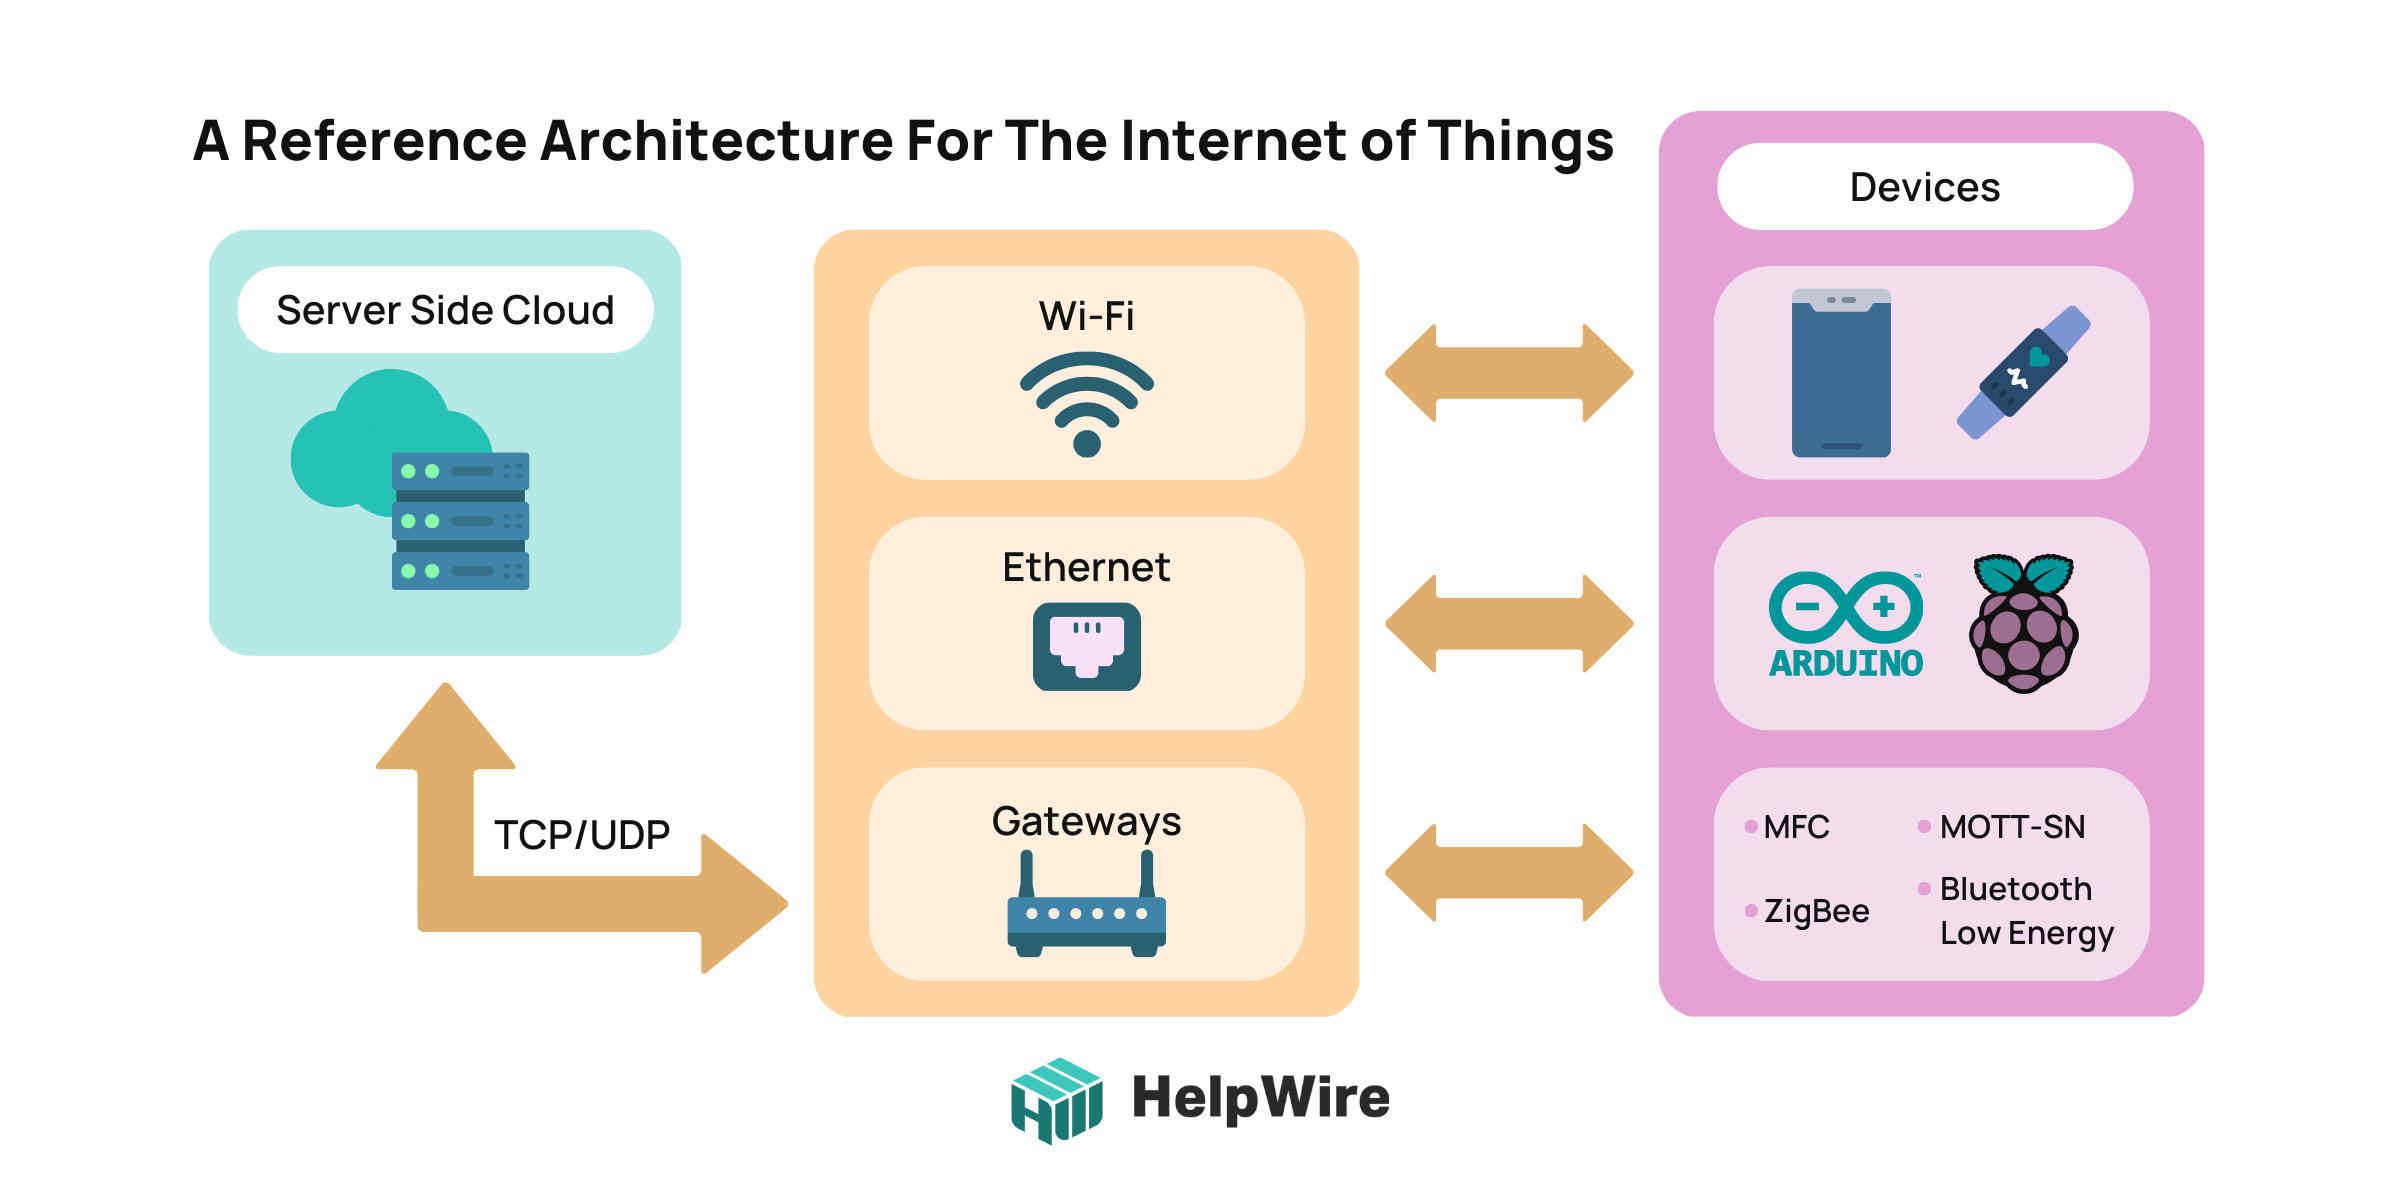 A Reference Architecture For The Internet of Things